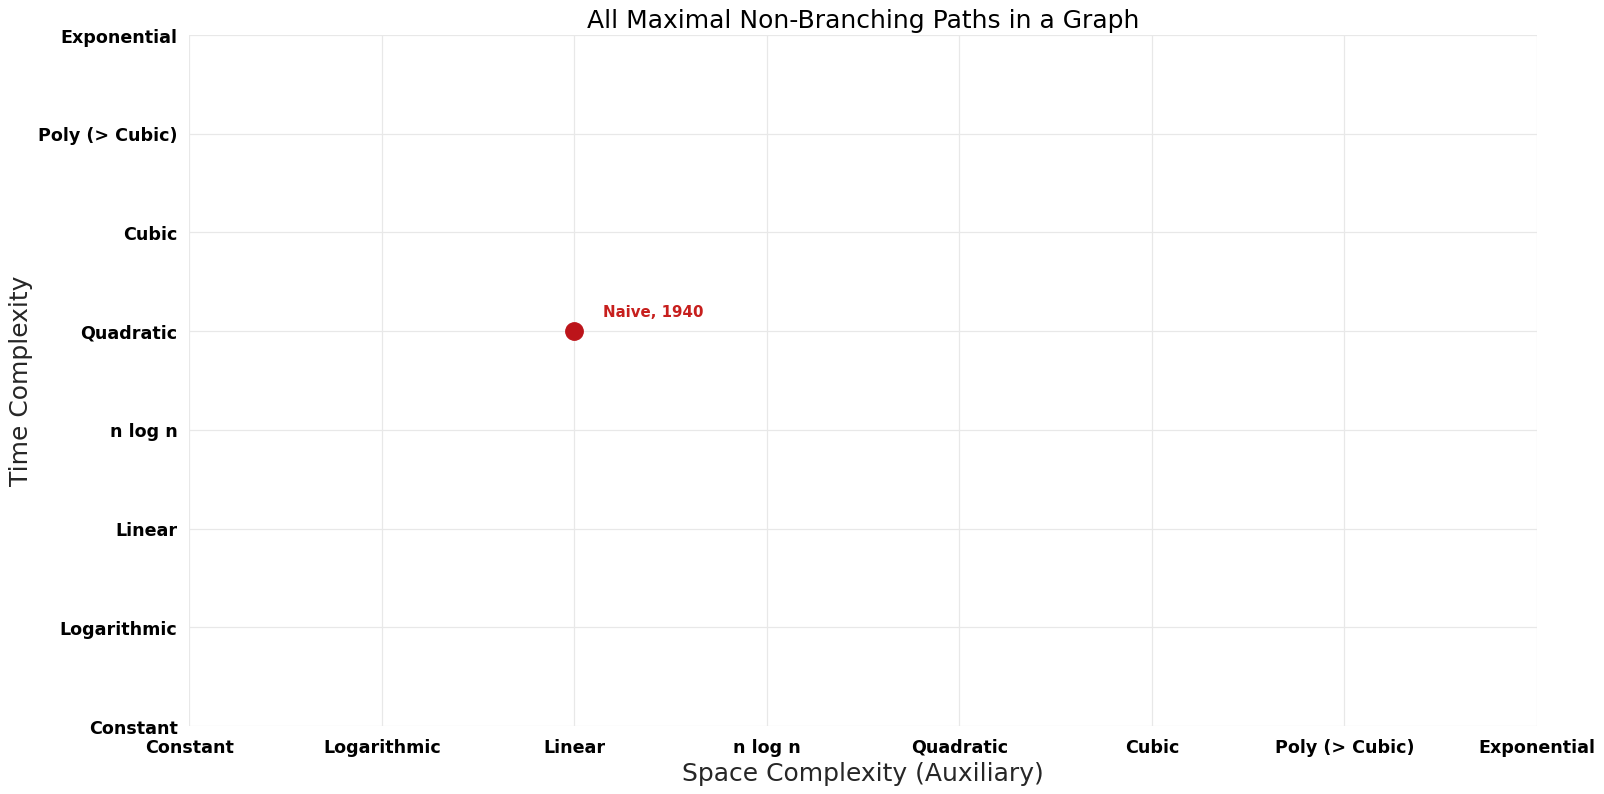 File:All Maximal Non-Branching Paths in a Graph - Pareto Frontier.png